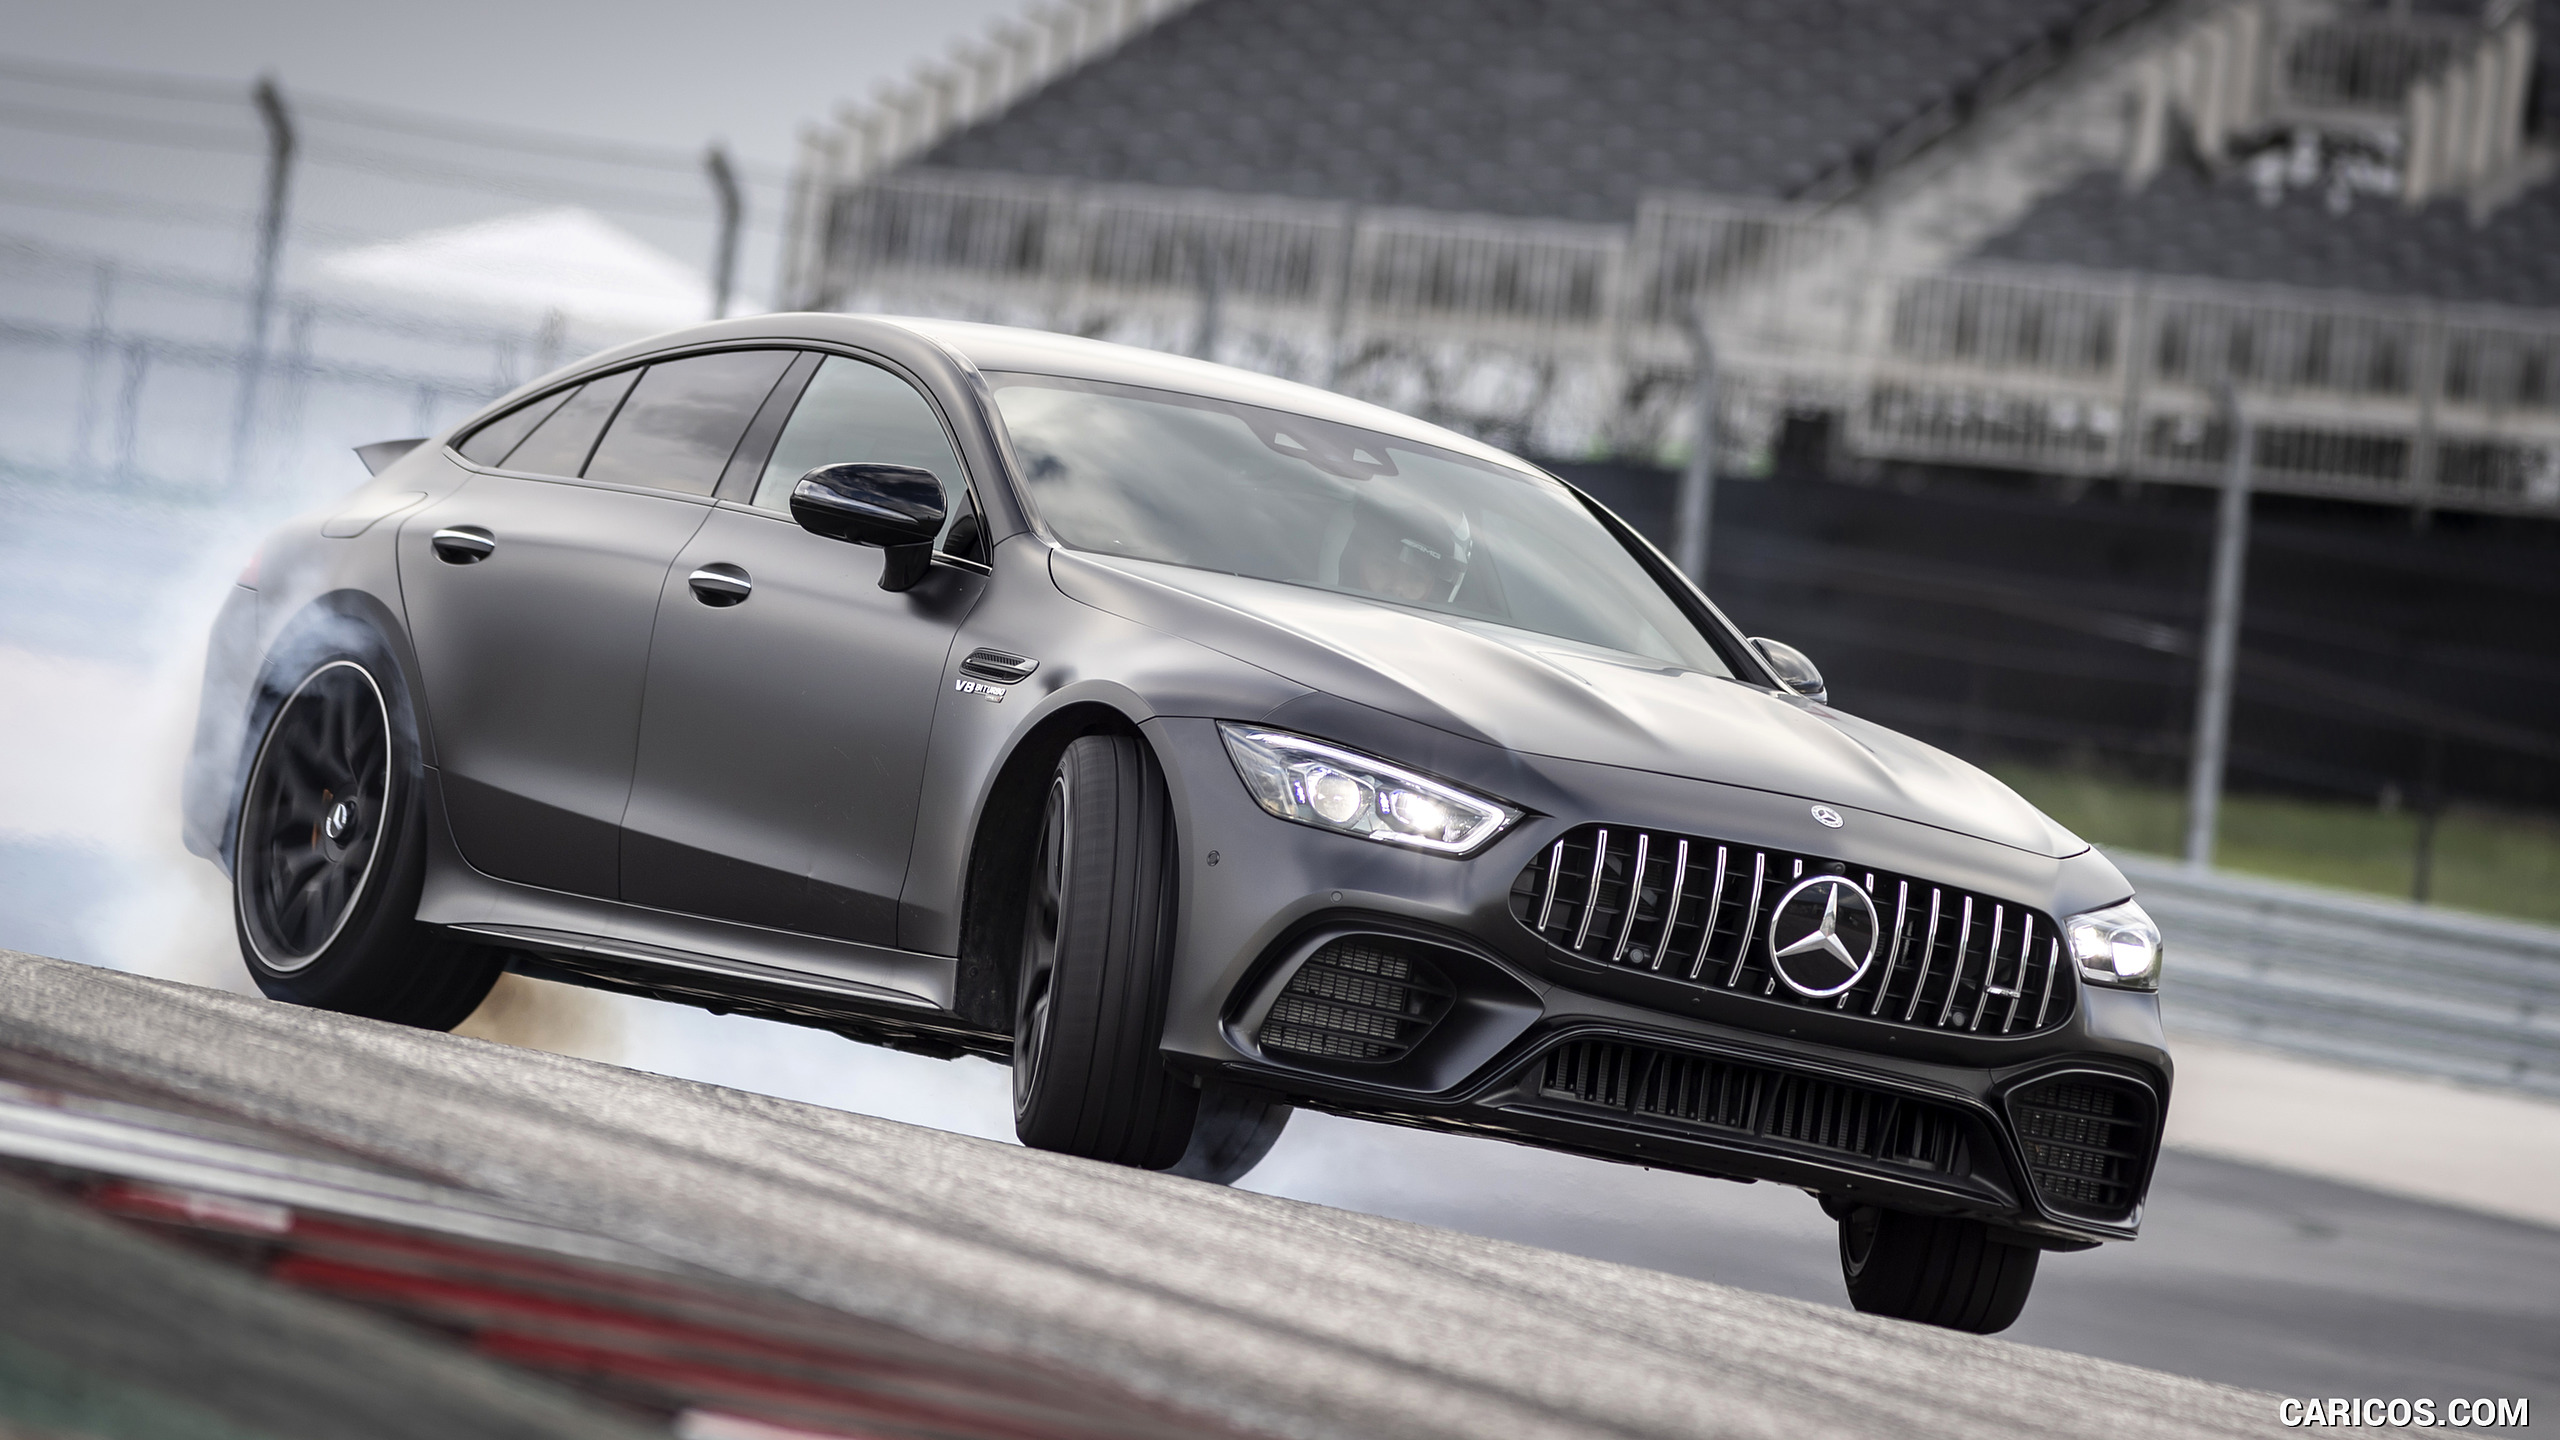 2019 Mercedes-AMG GT 63 S 4MATIC+ 4-Door Coupe - Front Three-Quarter, #184 of 427